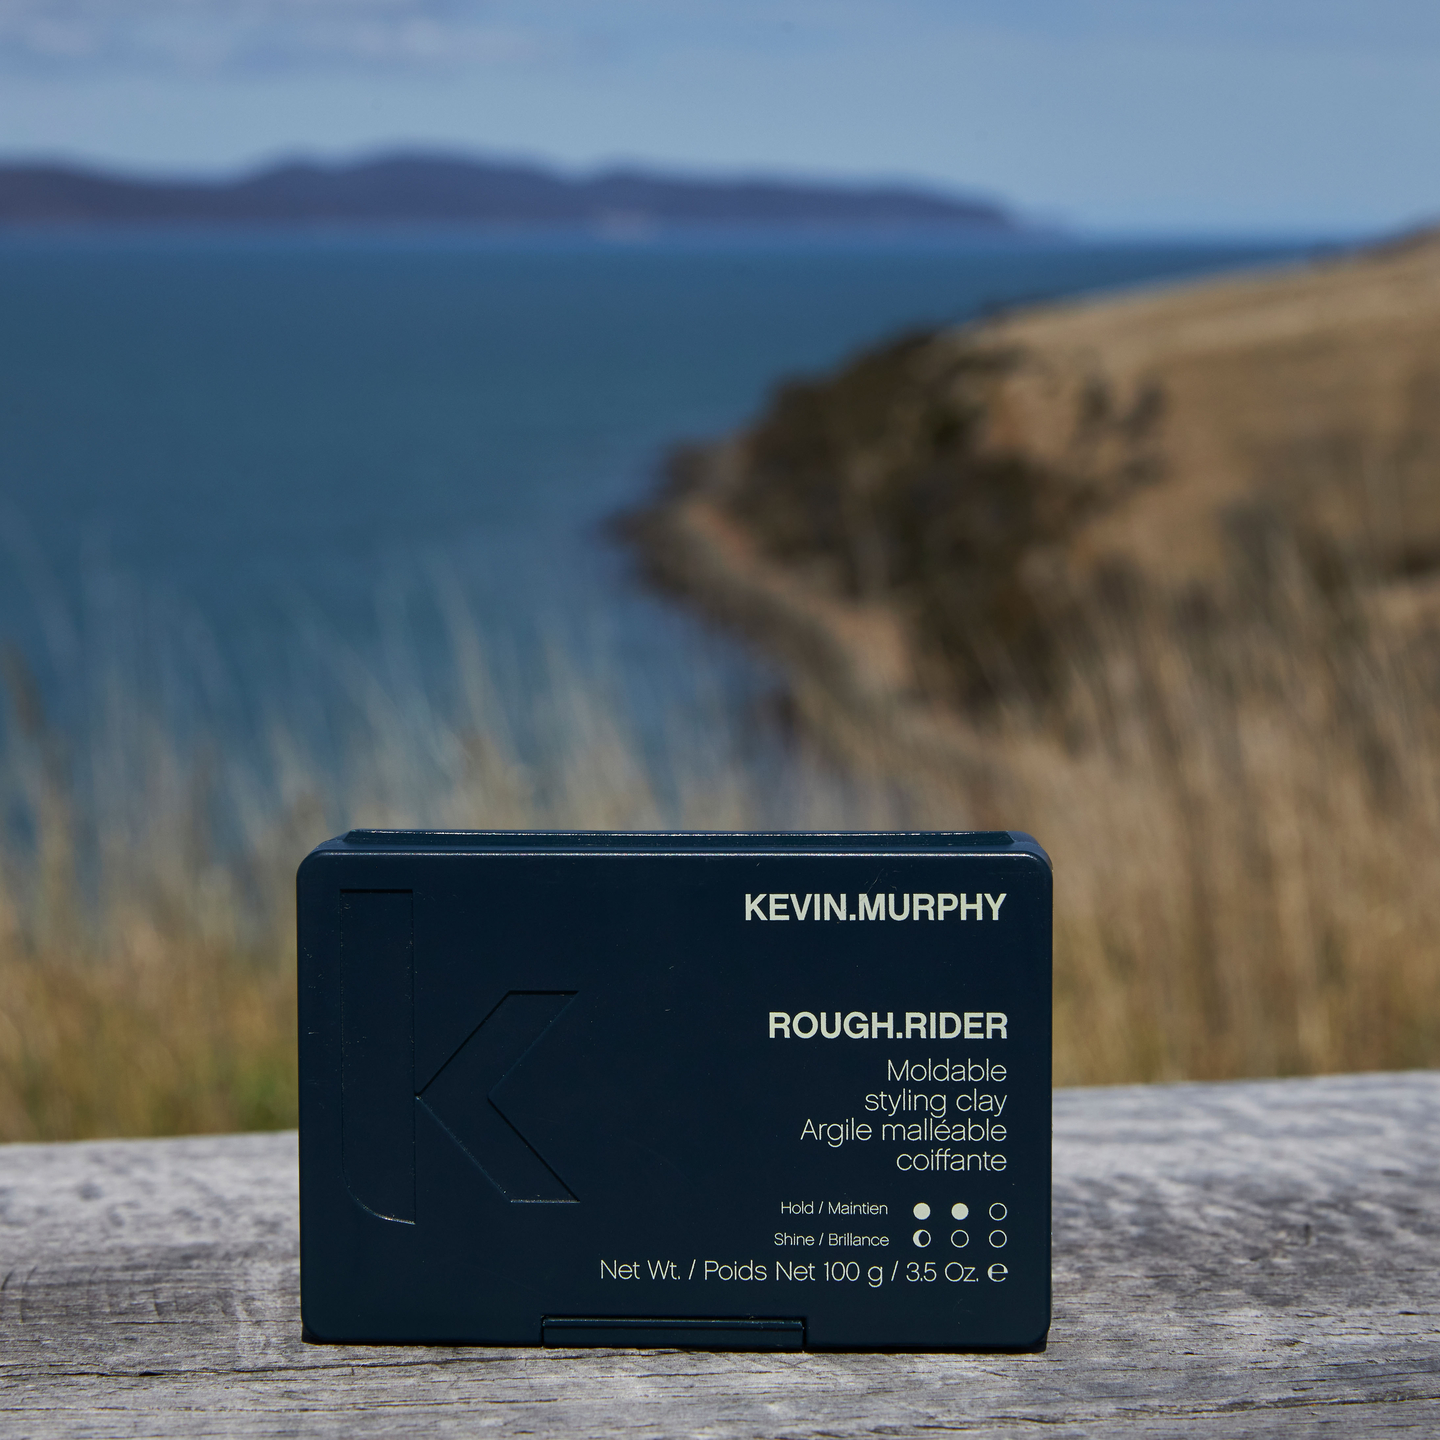 Outdoor image of KEVIN.MURPHY ROUGH.RIDER styling clay packaging, displaying the product's name and attributes like hold and shine level on the label, set against a blurred natural backdrop.